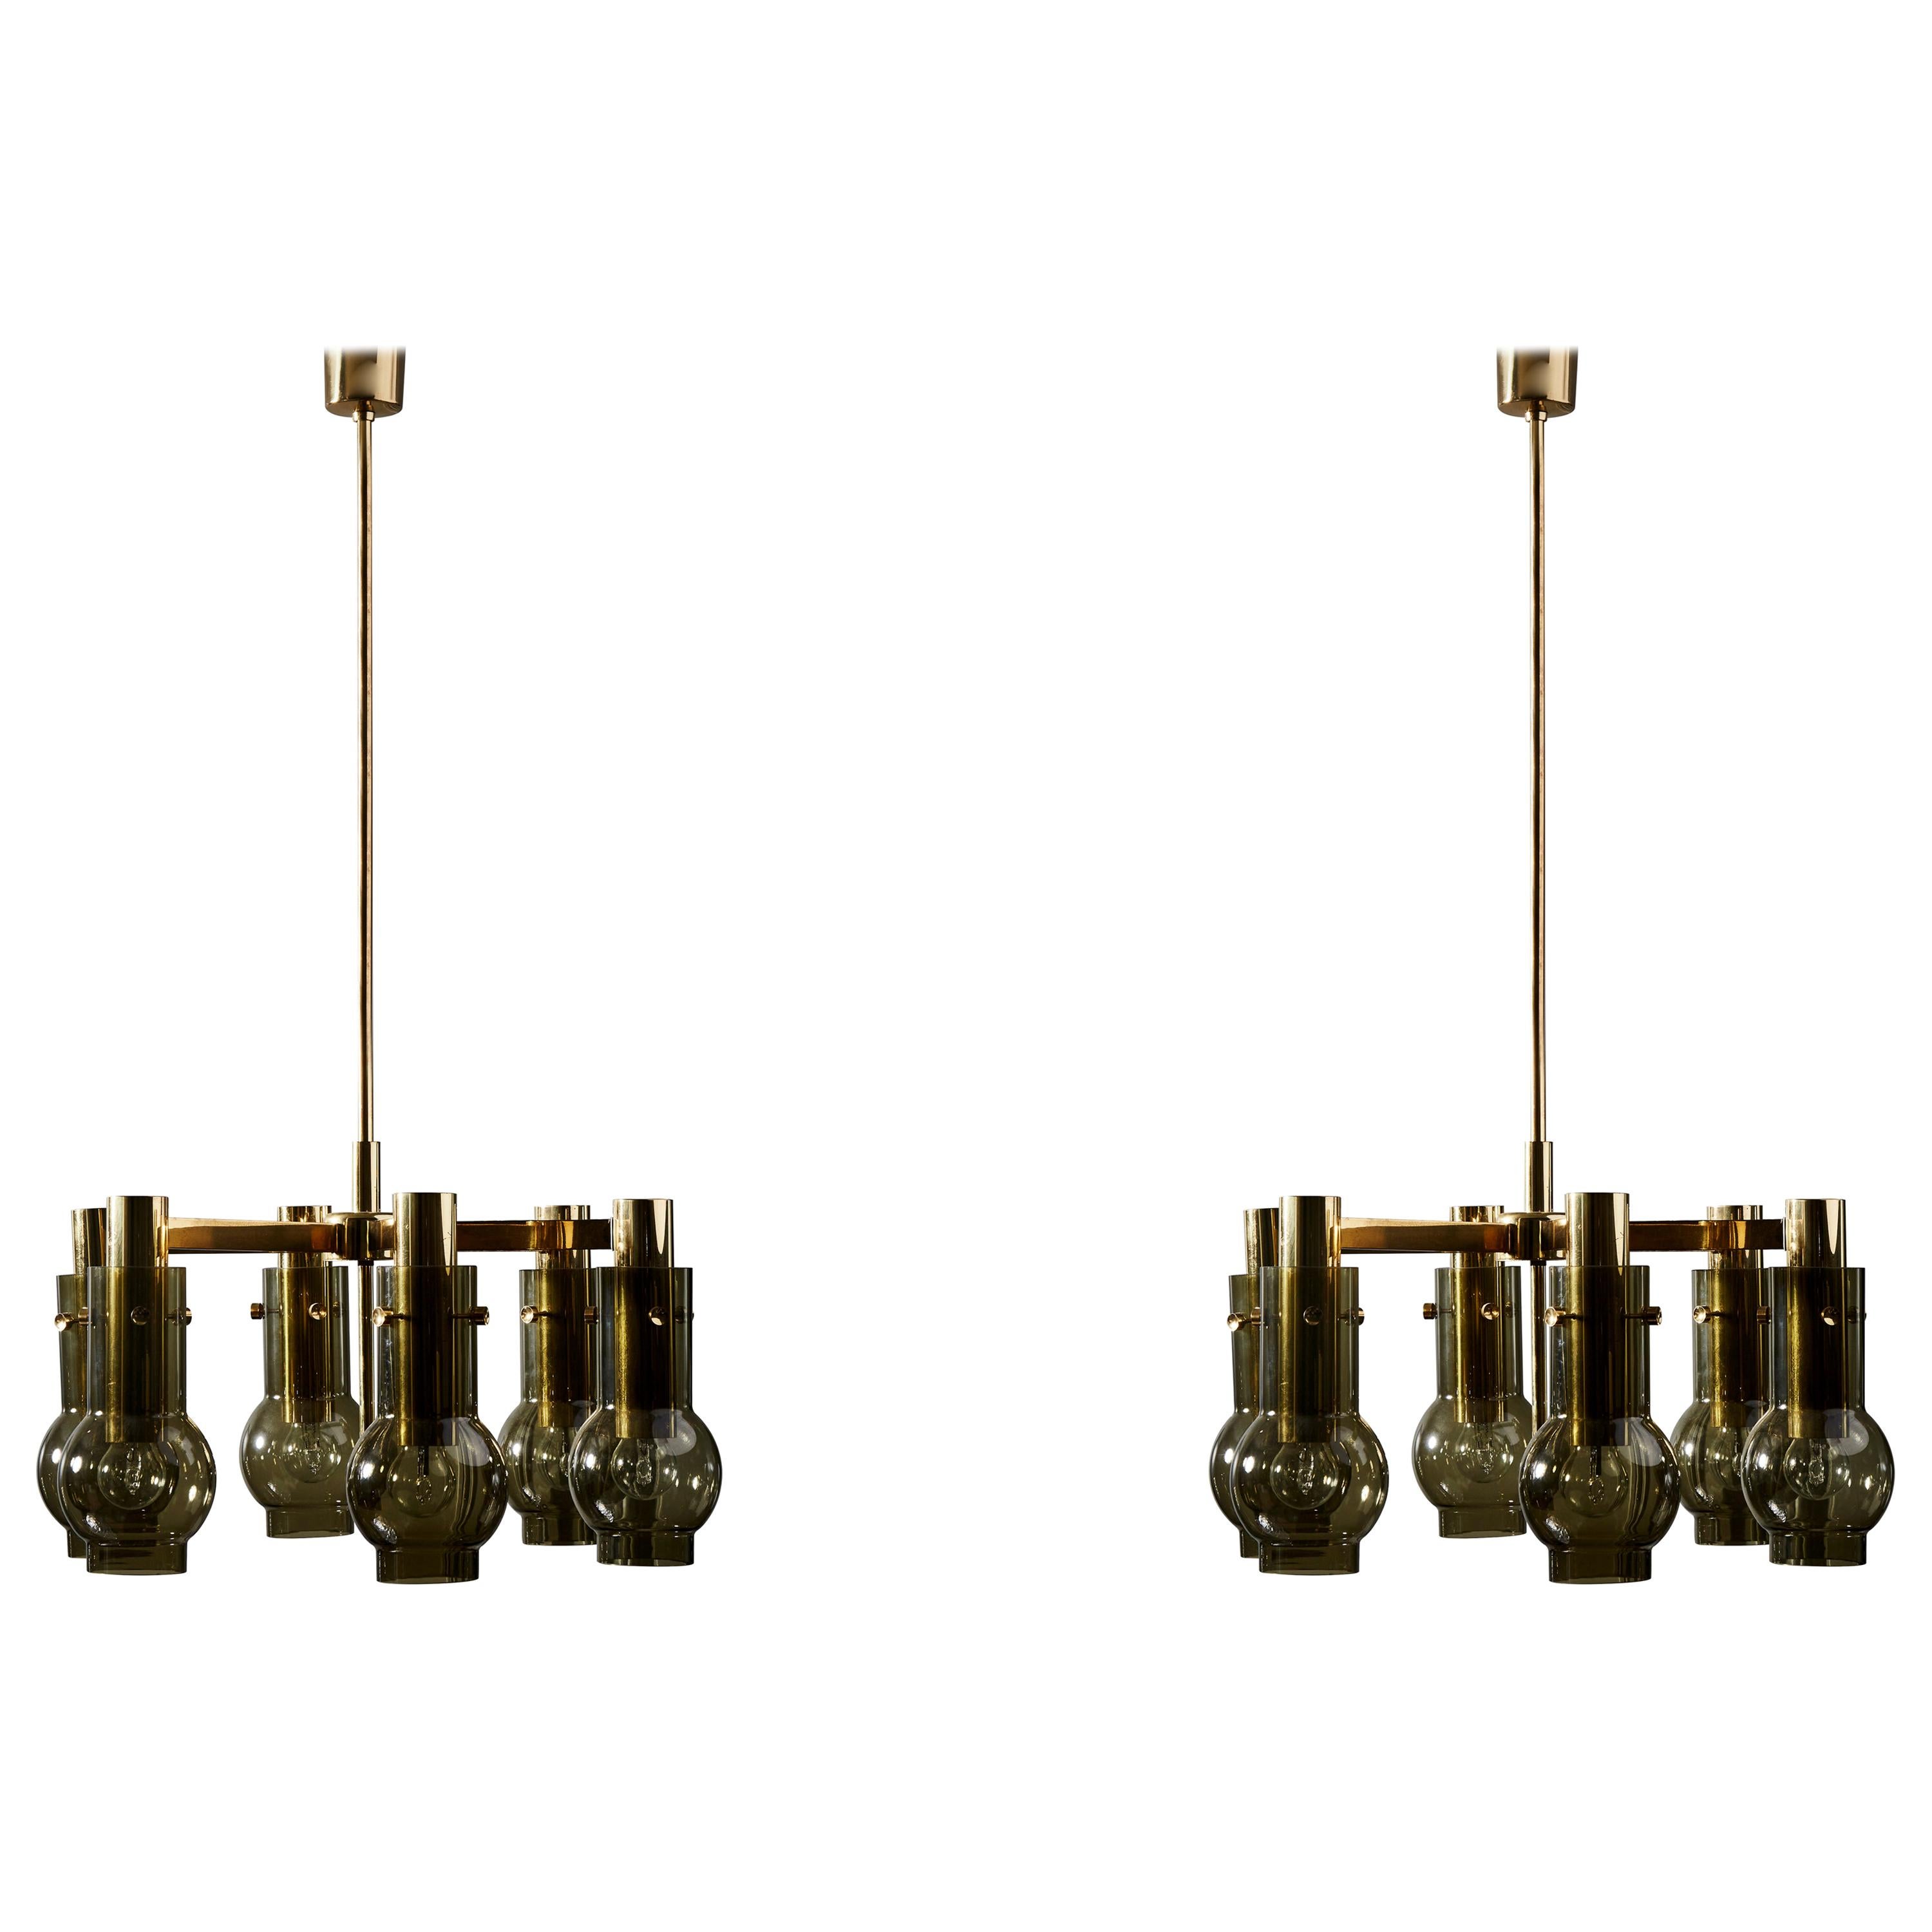 Pair of Hans Agne Jakobsson Six Arms Chandeliers with Smoke Grey Glass Shades For Sale